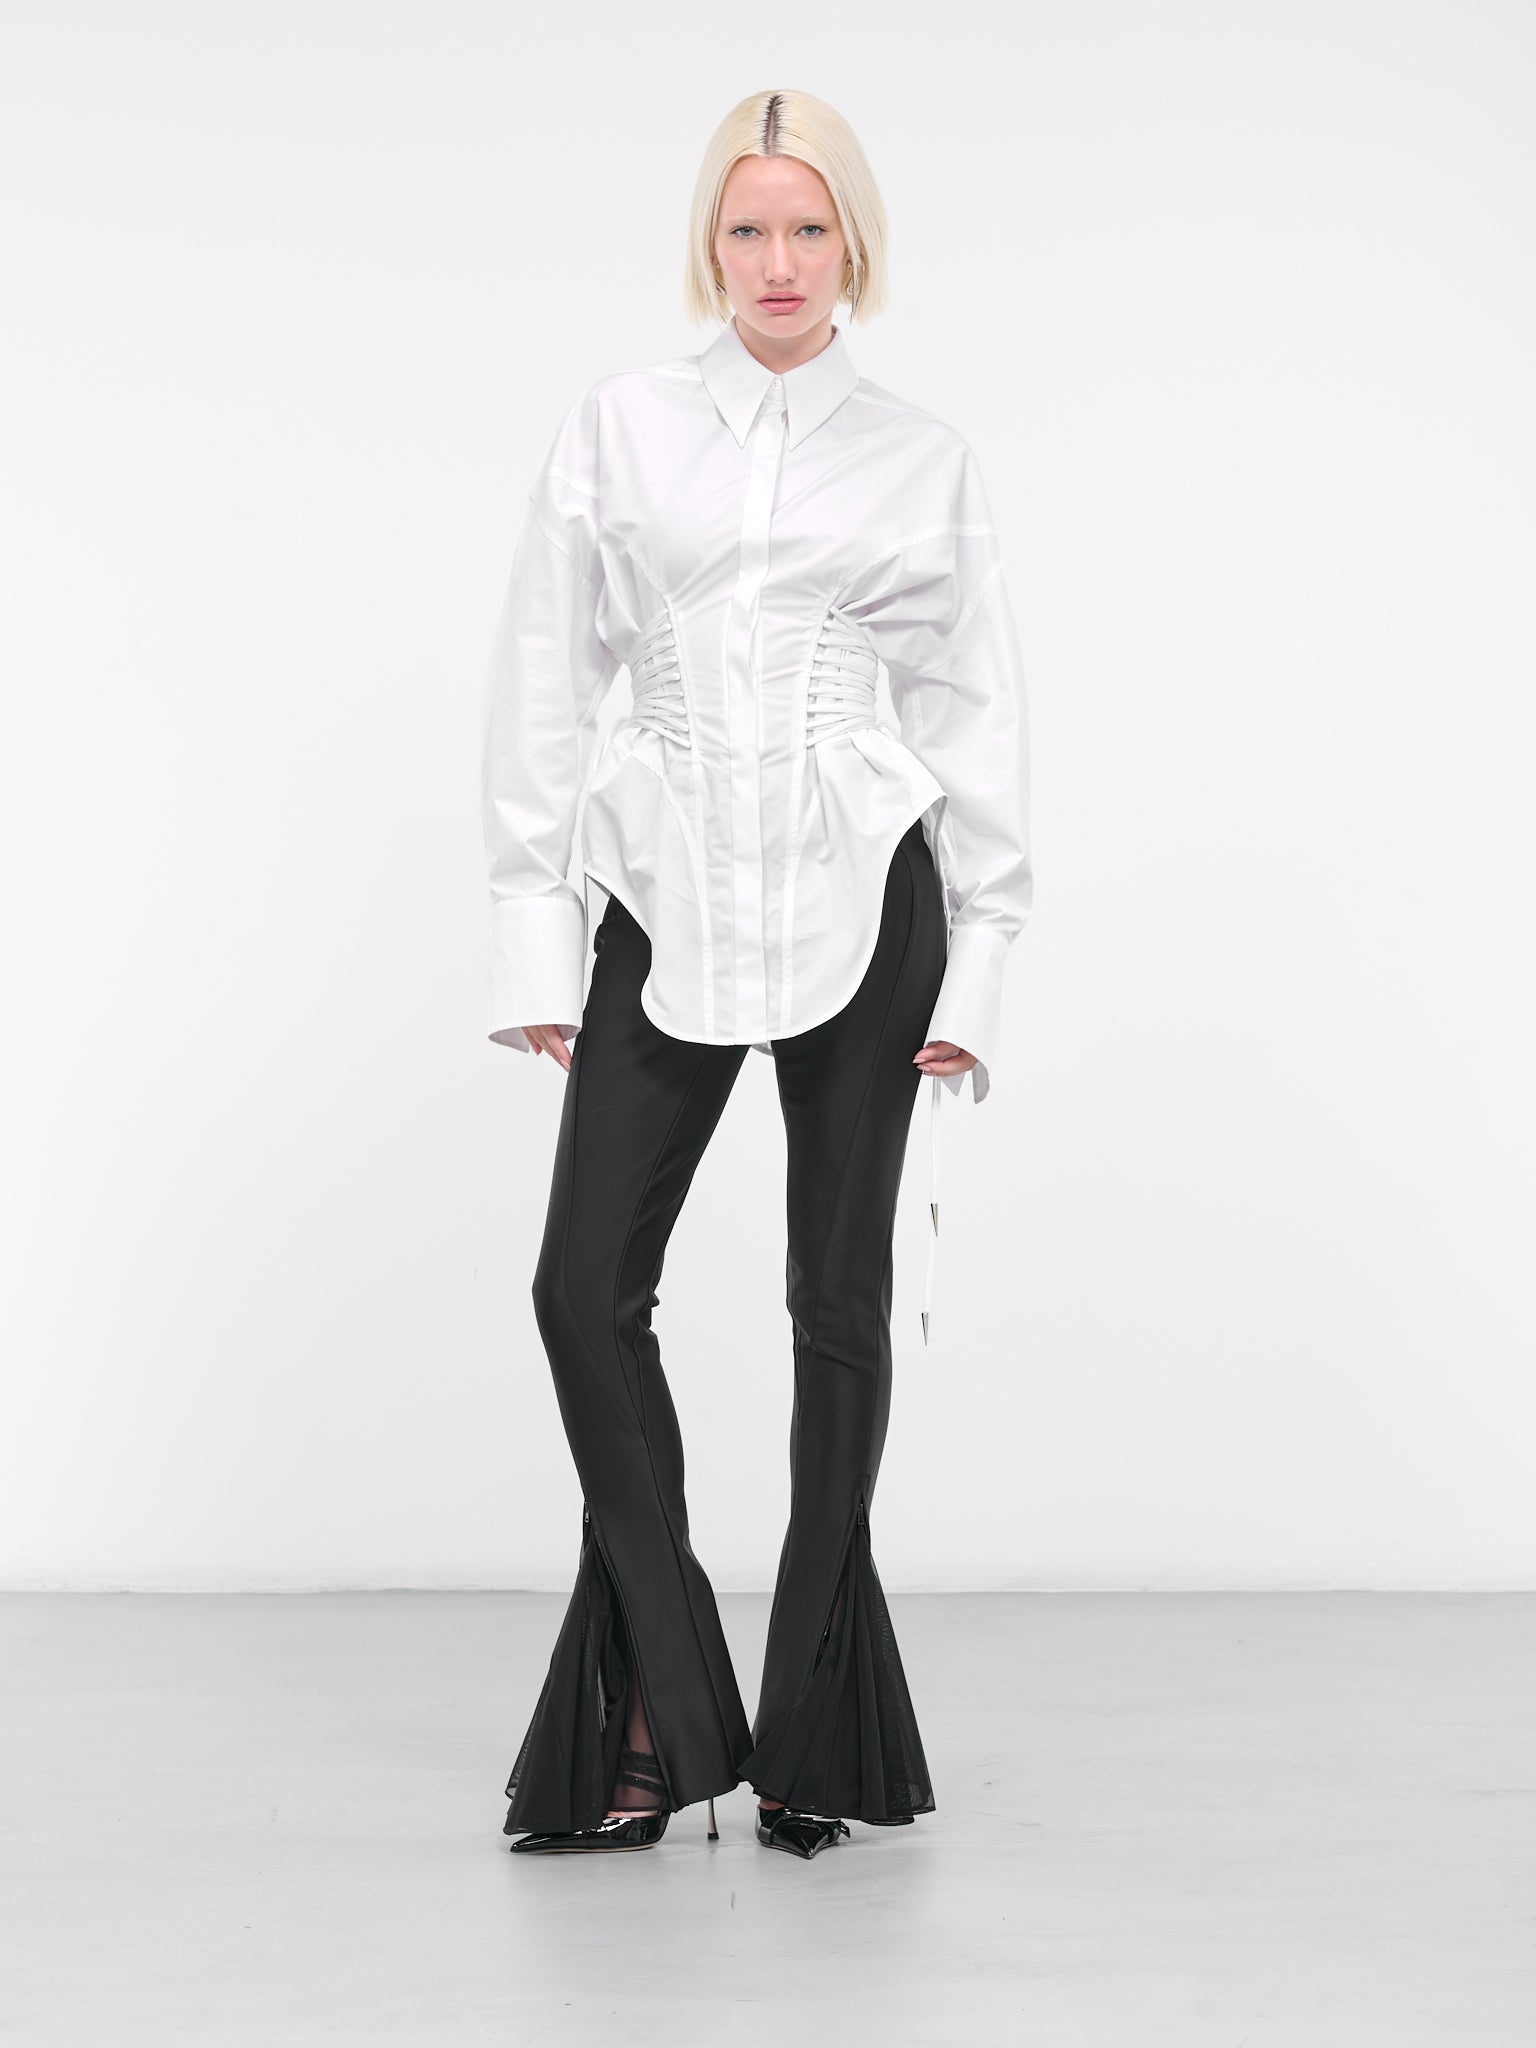 Laced-Up Shirt (23WT00641259-WHITE)